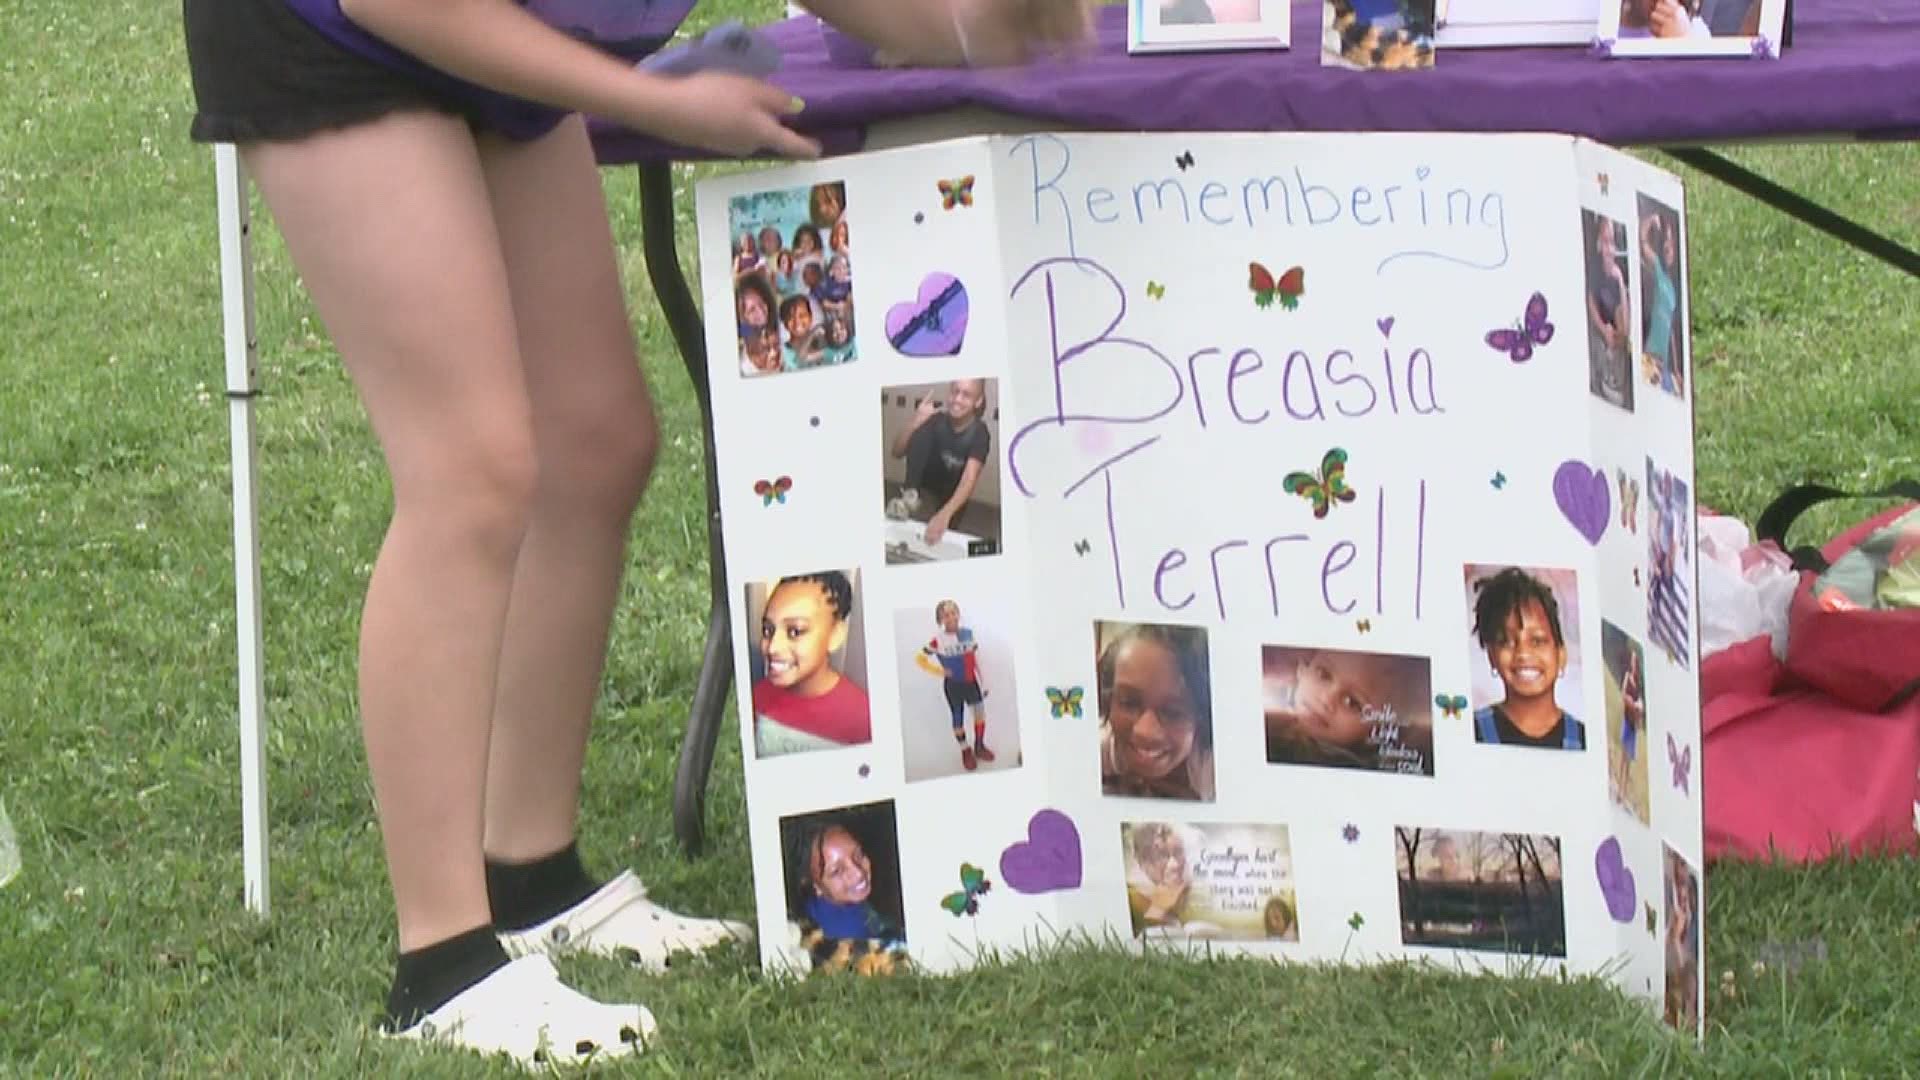 This group wants to keep Breasia's memory alive and raise awareness within the community.